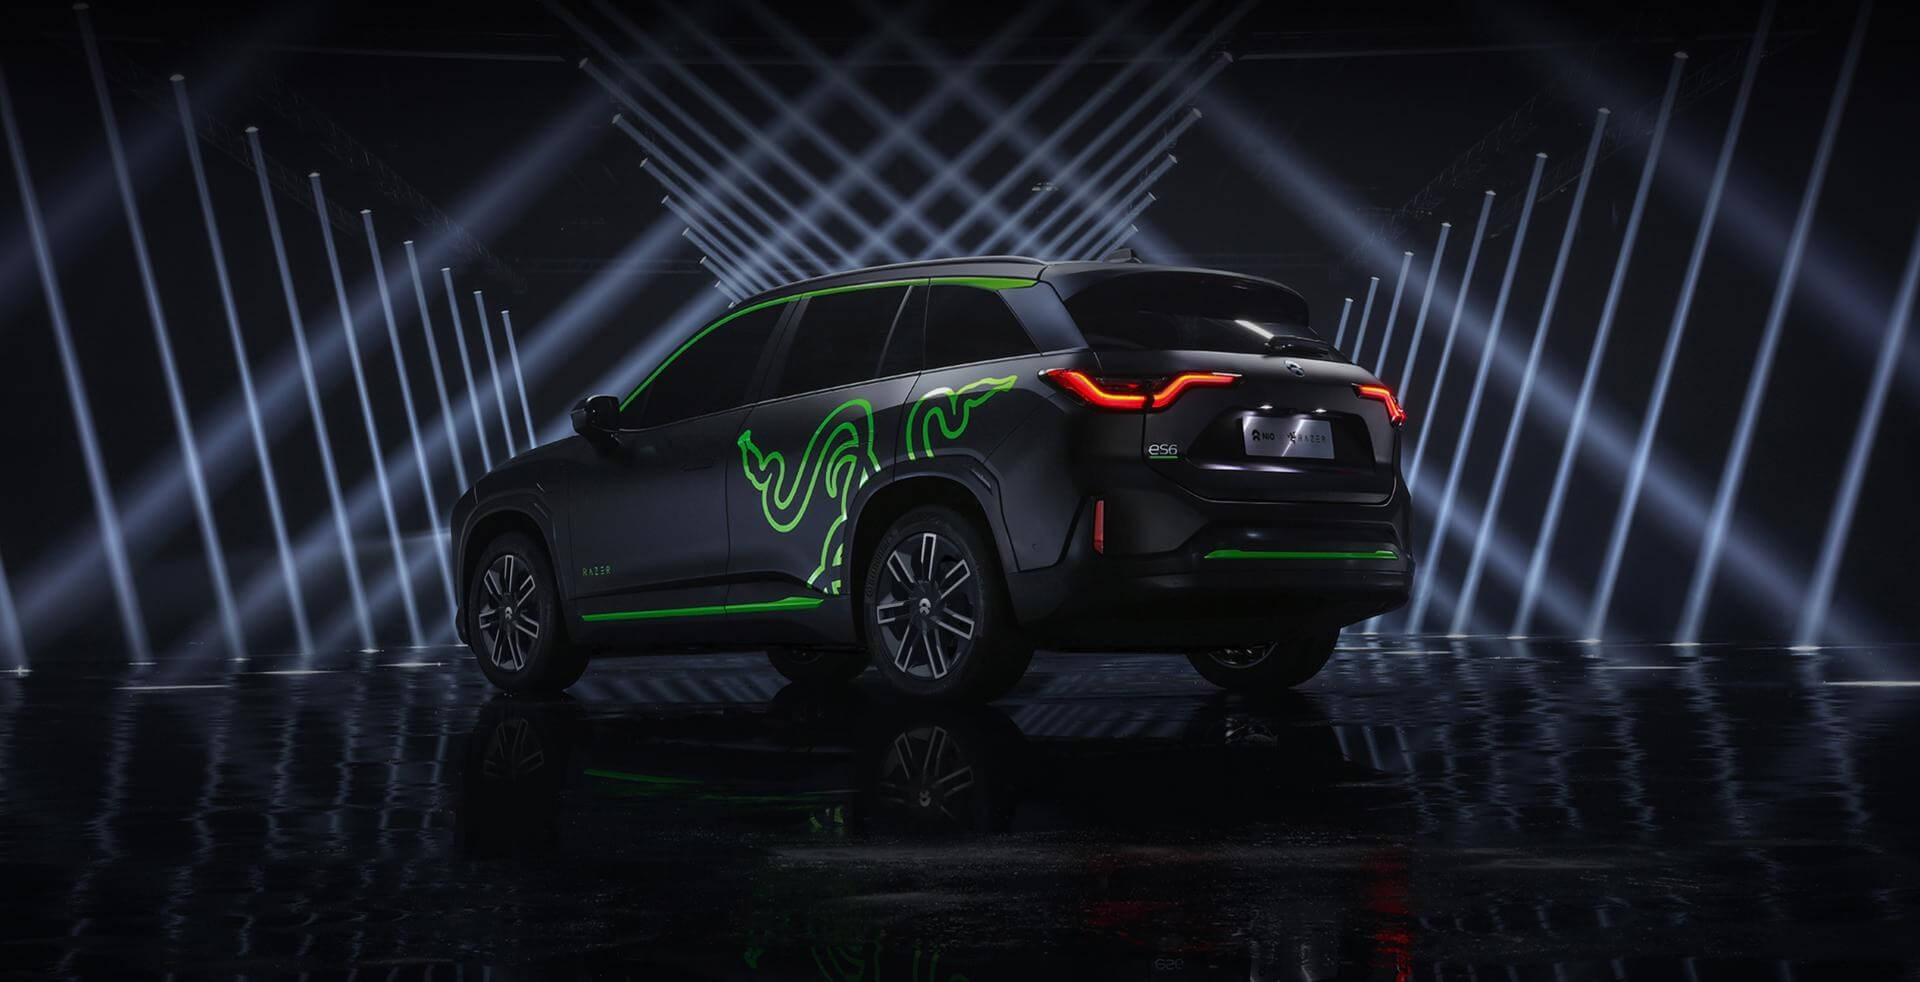 Razer's newest accessory is an electric SUV